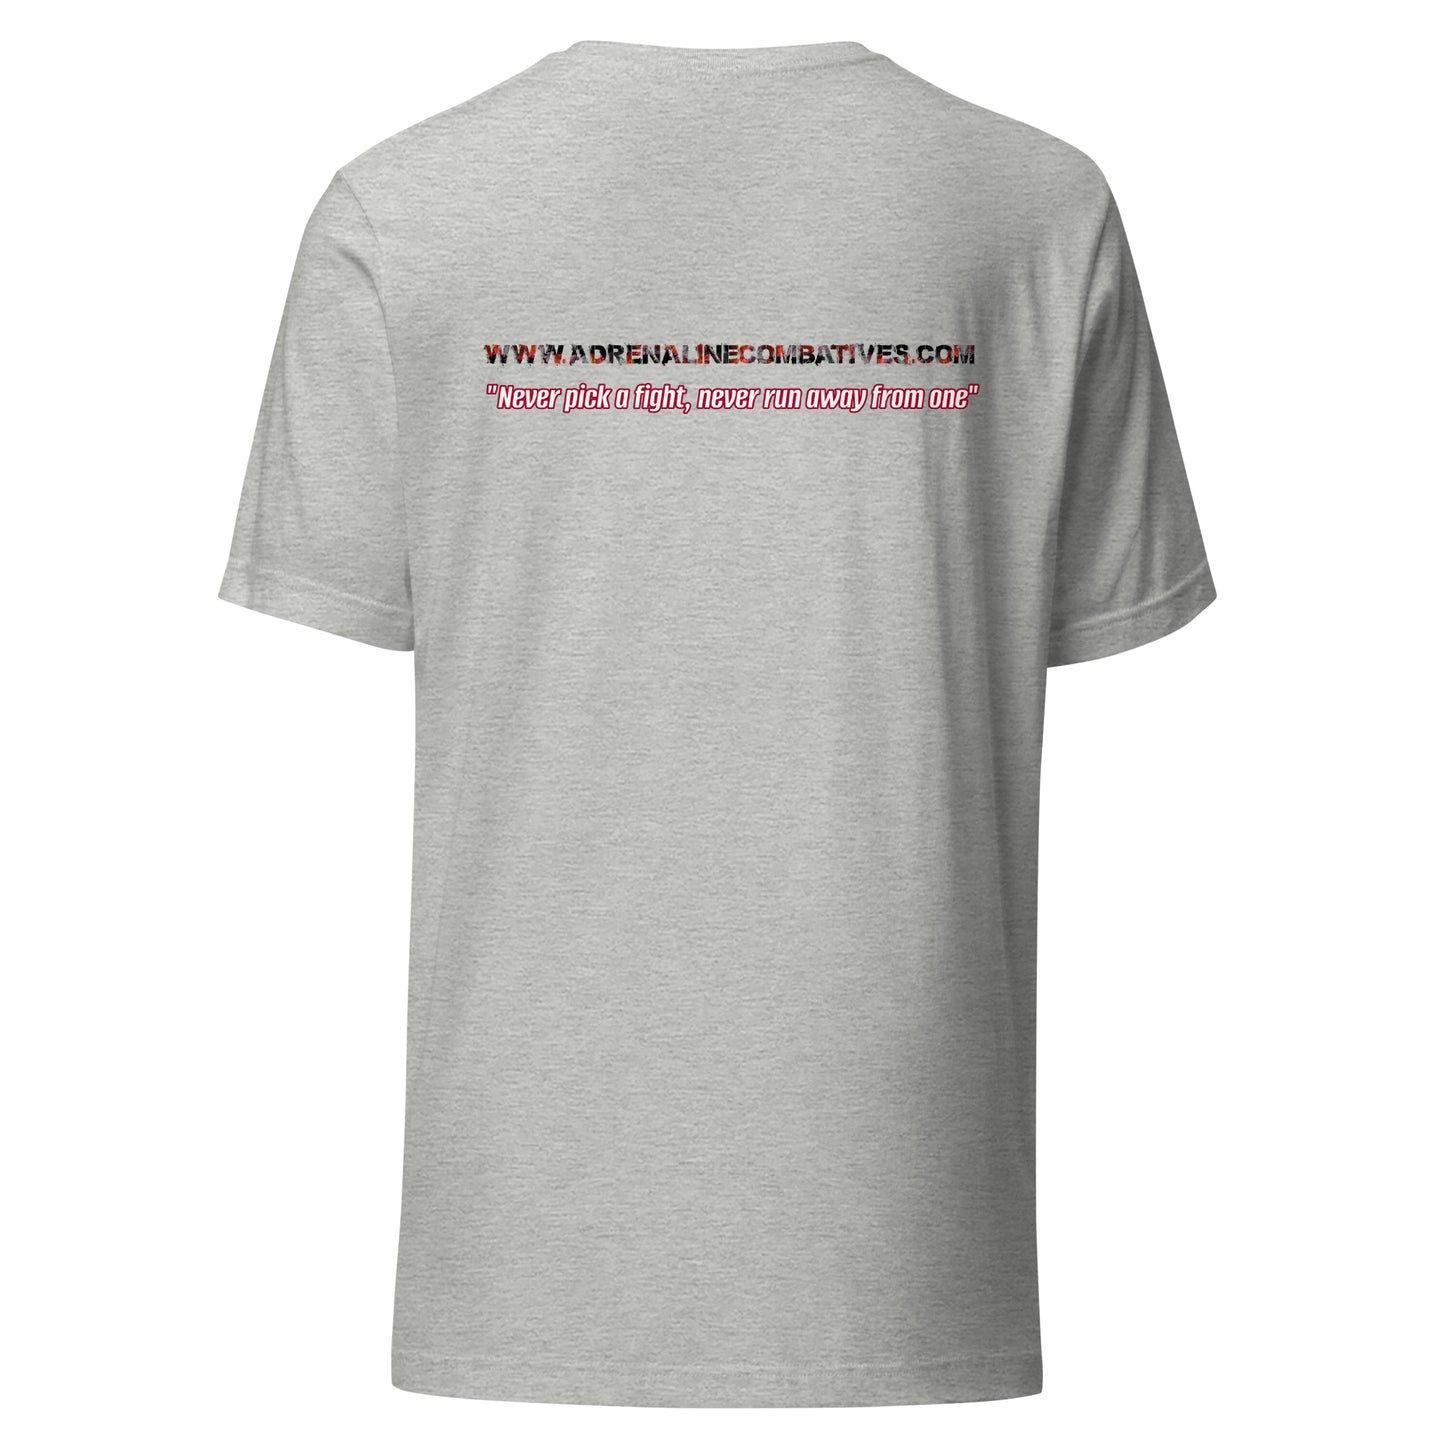 Unisex t-shirt - Adrenaline Combatives - Quote: “Never pick a fight, never run away from one”